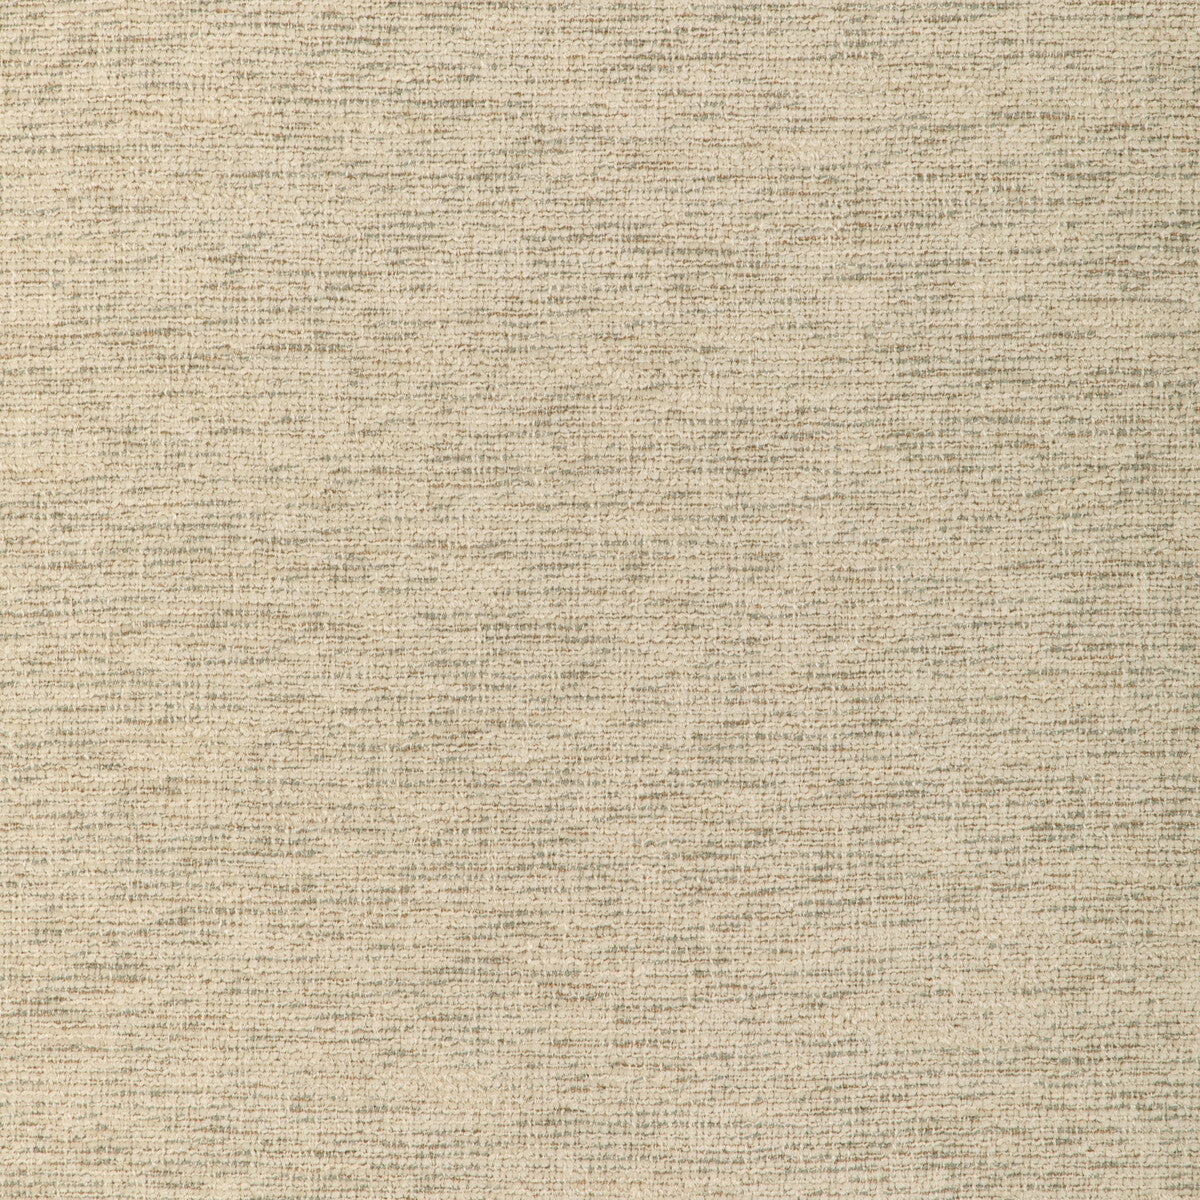 Krave Design fabric in 37213-1611 color - pattern 37213.1611.0 - by Kravet Design in the Woven Colors collection